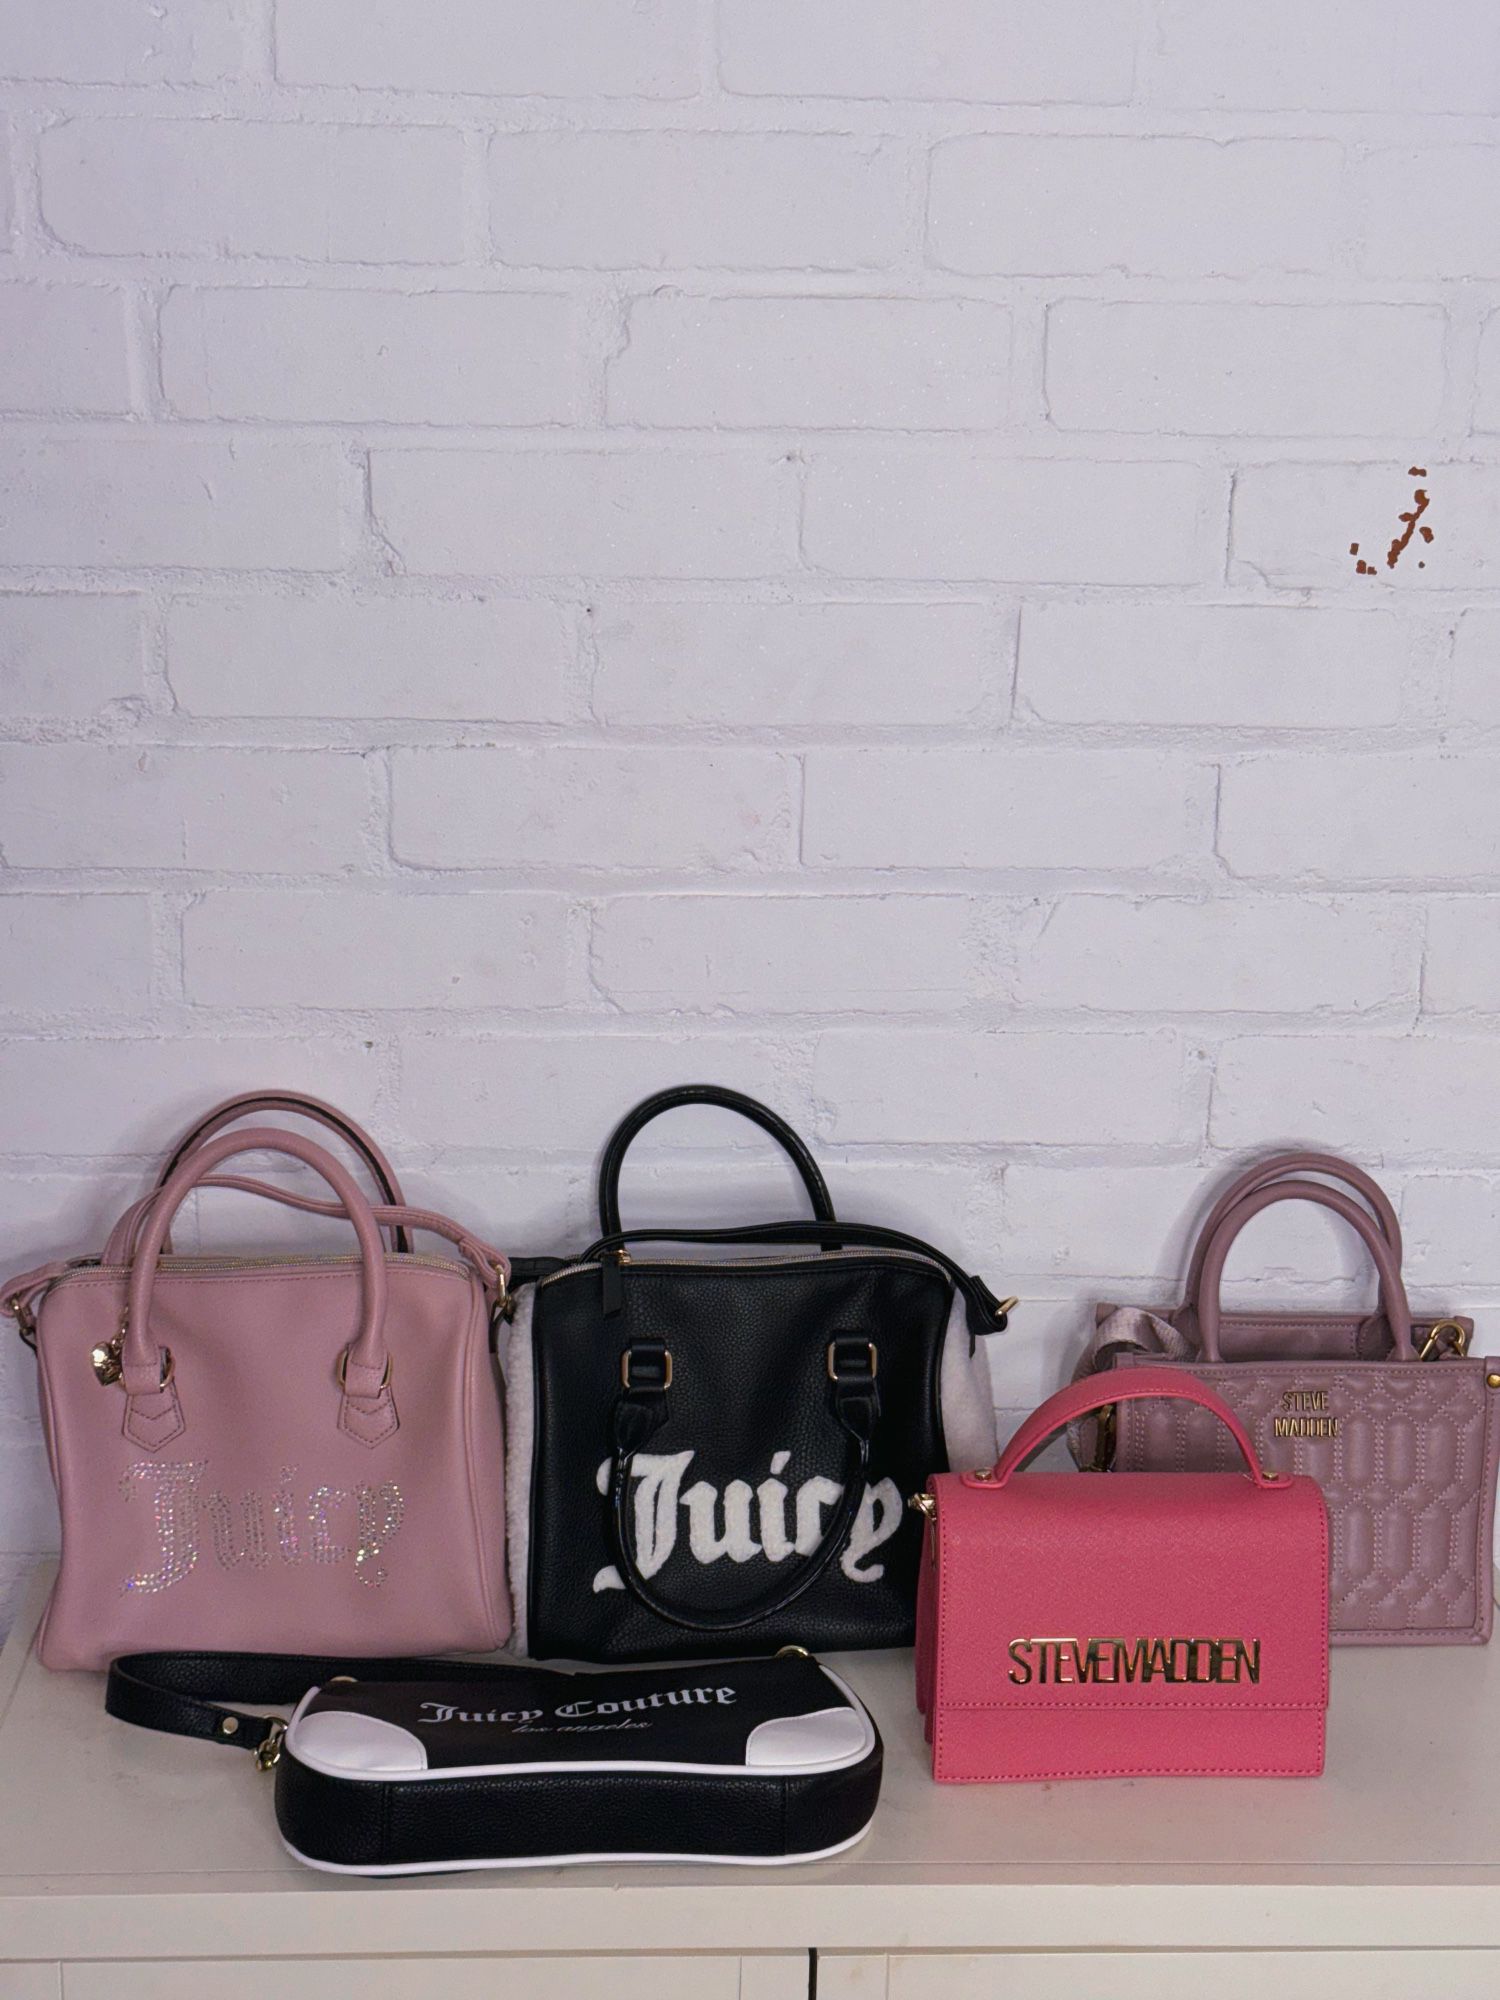 Juicy Couture Bags And Steve Madden Bags Bundle